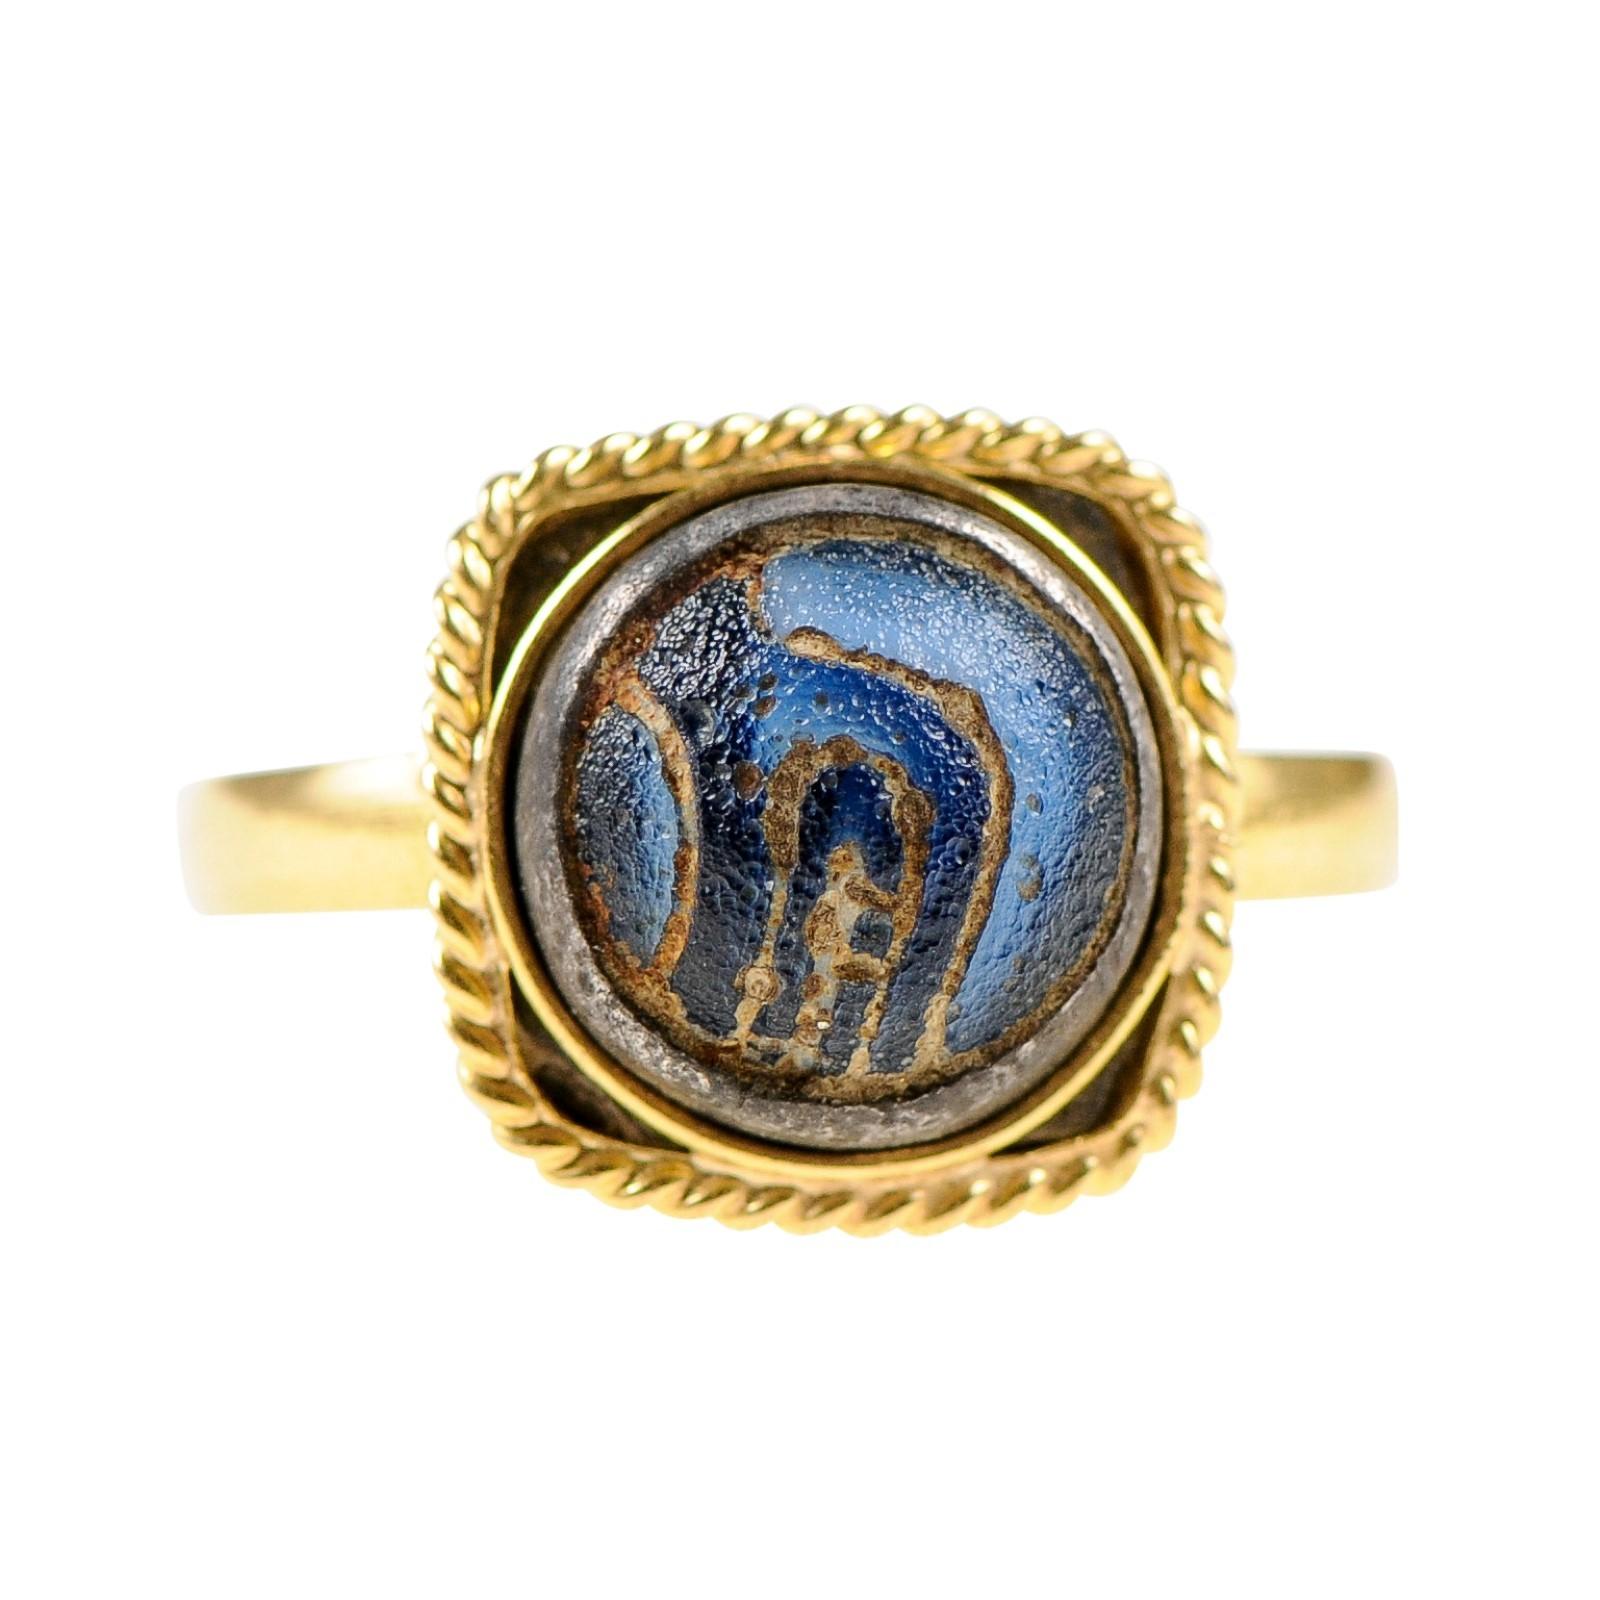 An authentic ancient Roman mosaic glass (4th to 6th century AD) custom mounted within a 21k gold band and squared/rope bezel. The coloration of this ancient Roman glass is cobalt/navy blue in color, with beautiful engraving, which contrasts nicely